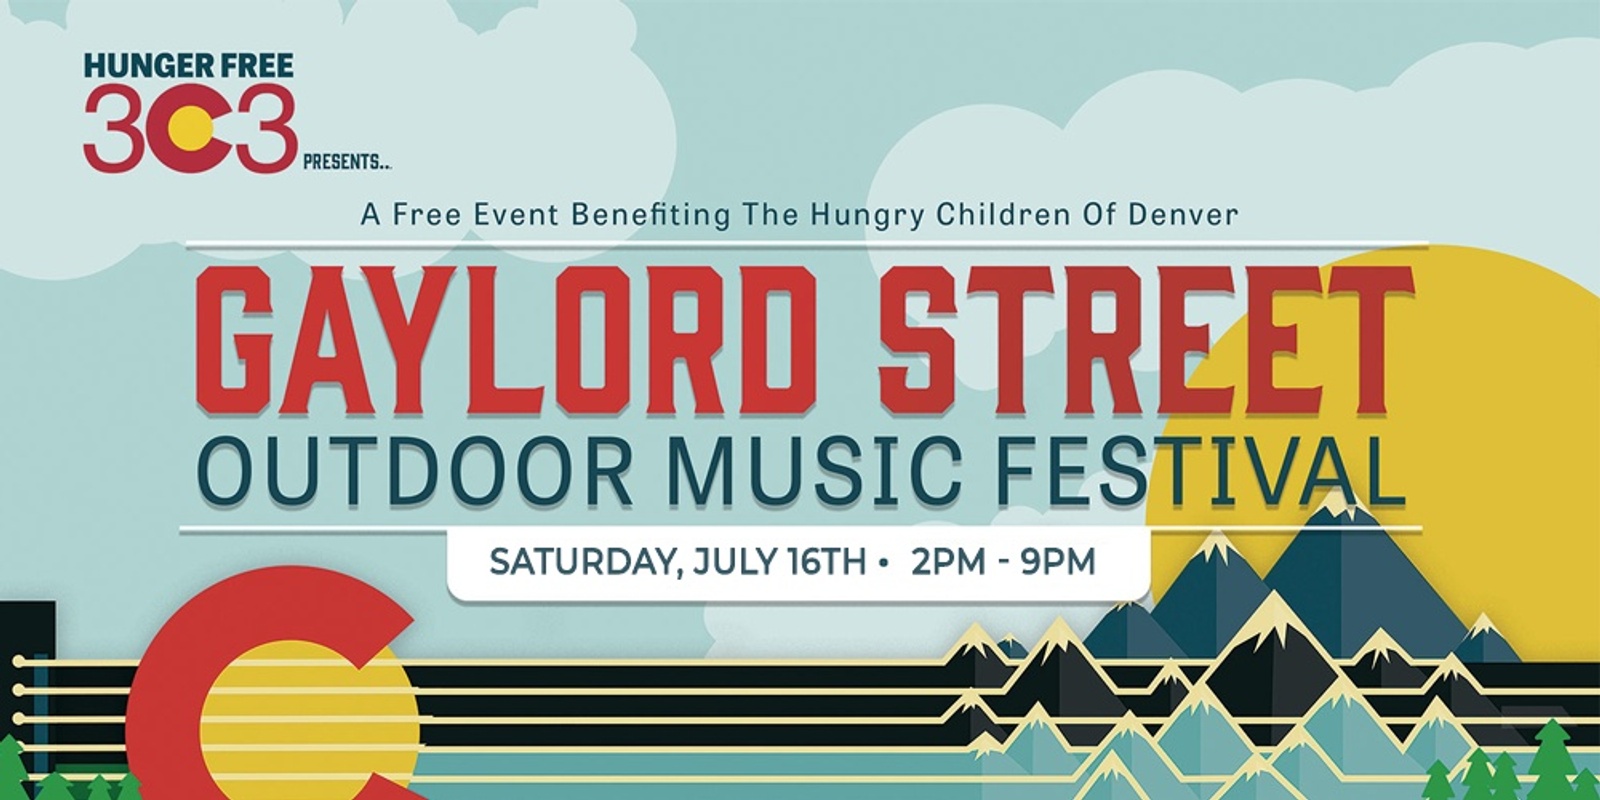 Hunger Free 303 Gaylord Street Outdoor Music Festival